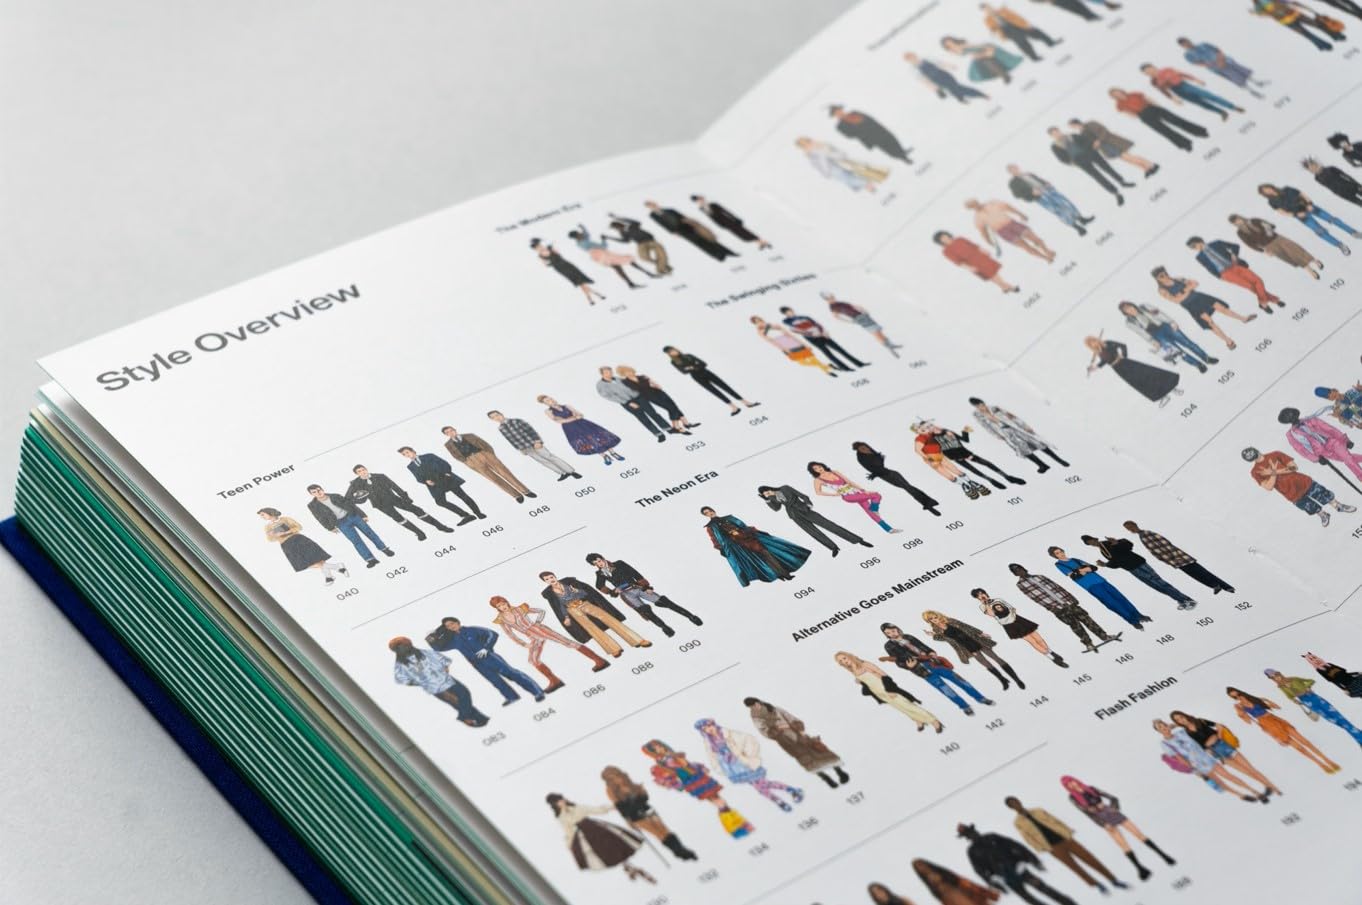 Stylepedia (Me & Asian Edition): A Visual Directory Of Fashion Styles